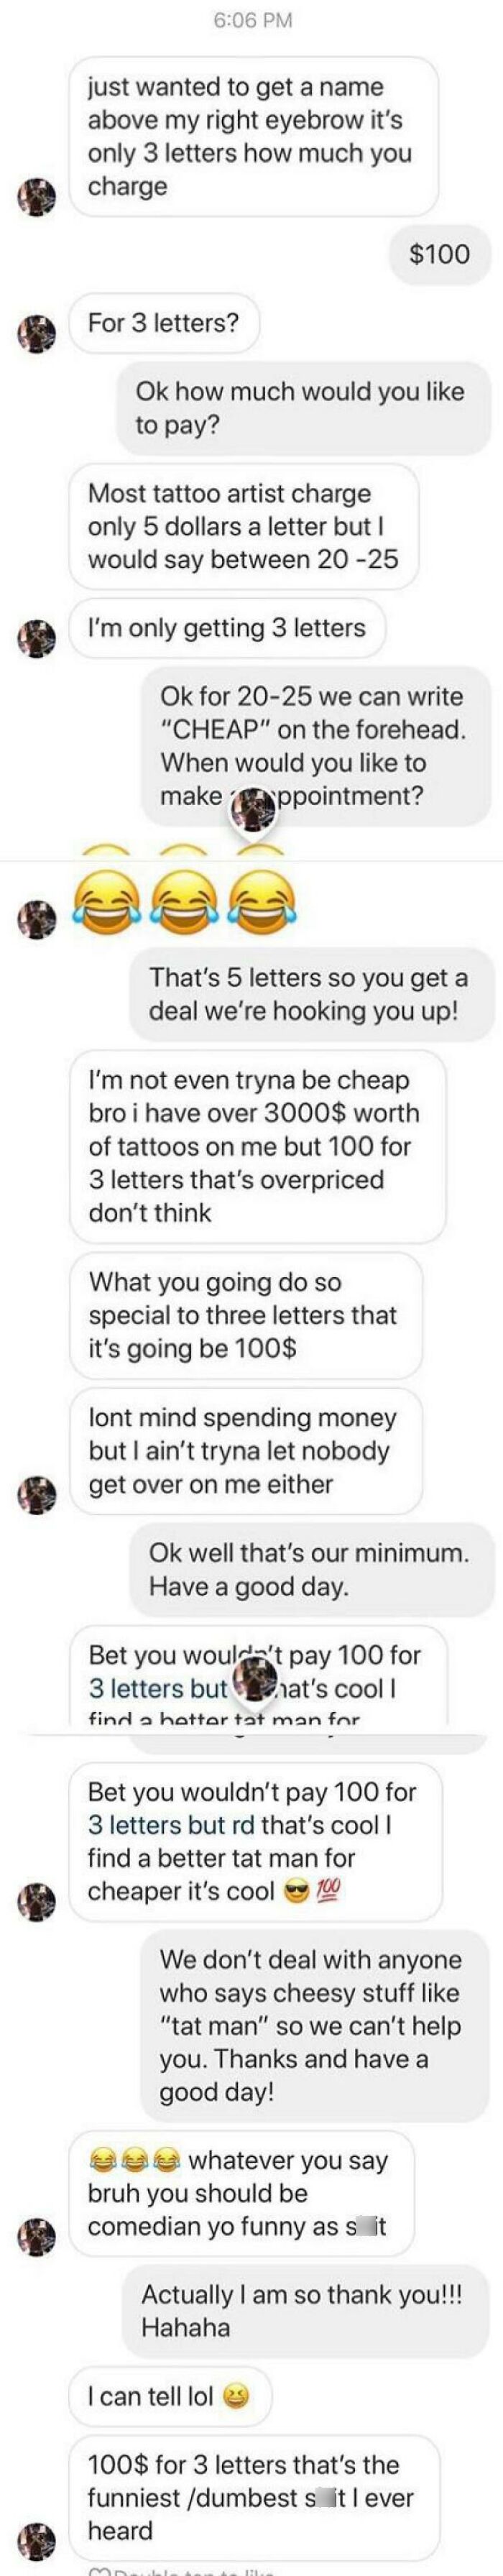 A Tattoo Artist I Know Recently Had This Interaction